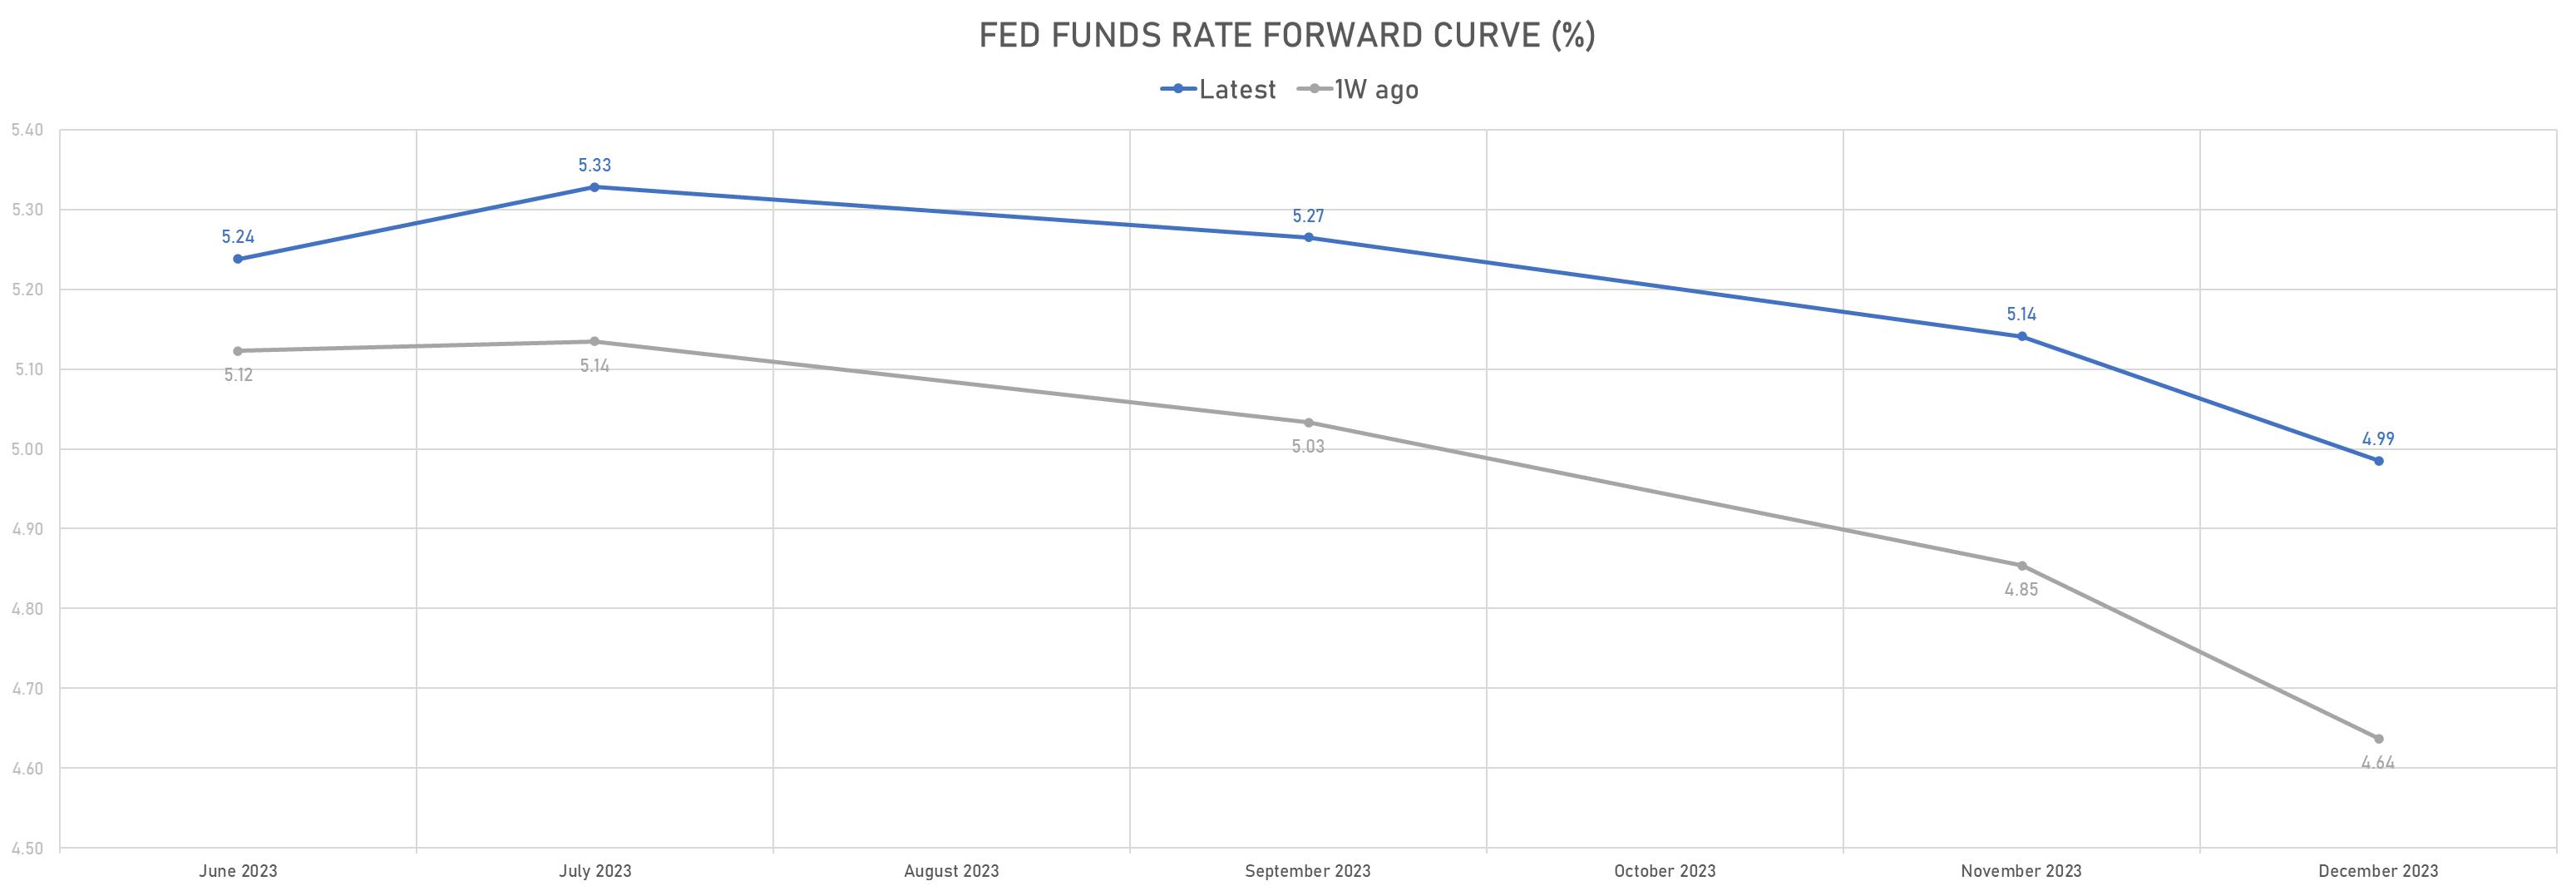 Fed Funds rate at next FOMC dates | Sources: phipost.com, Refinitiv data 